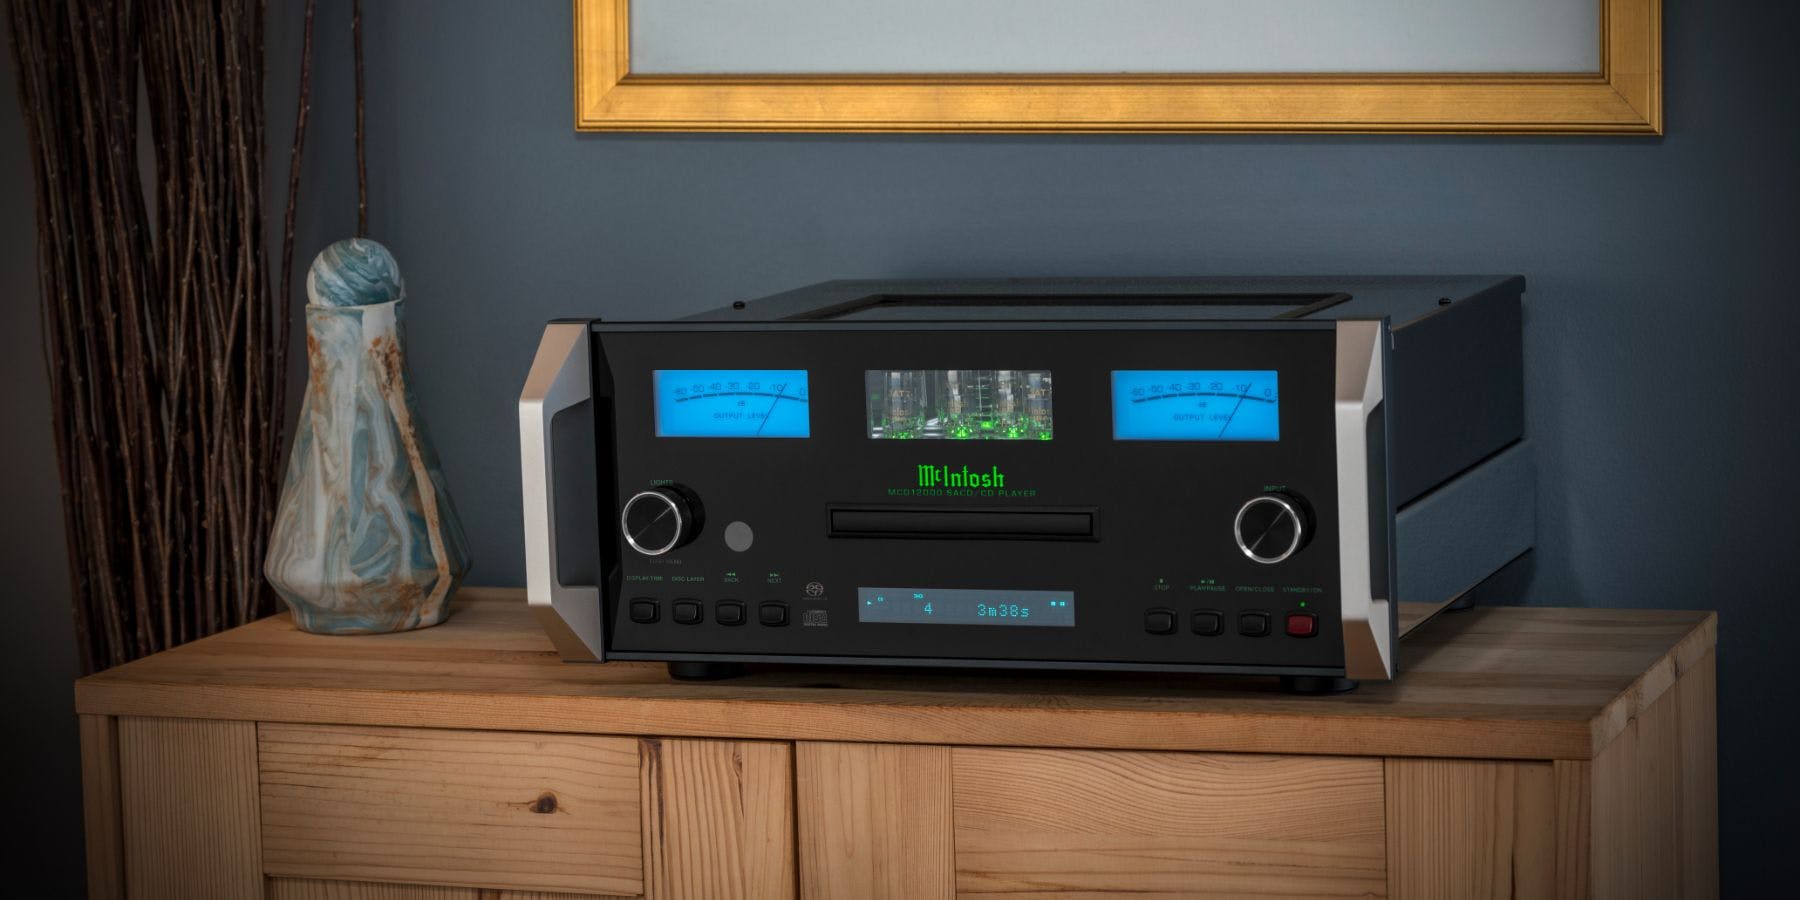 McIntosh has unveiled a new flagship SACD/CD player, the mighty MCD12000